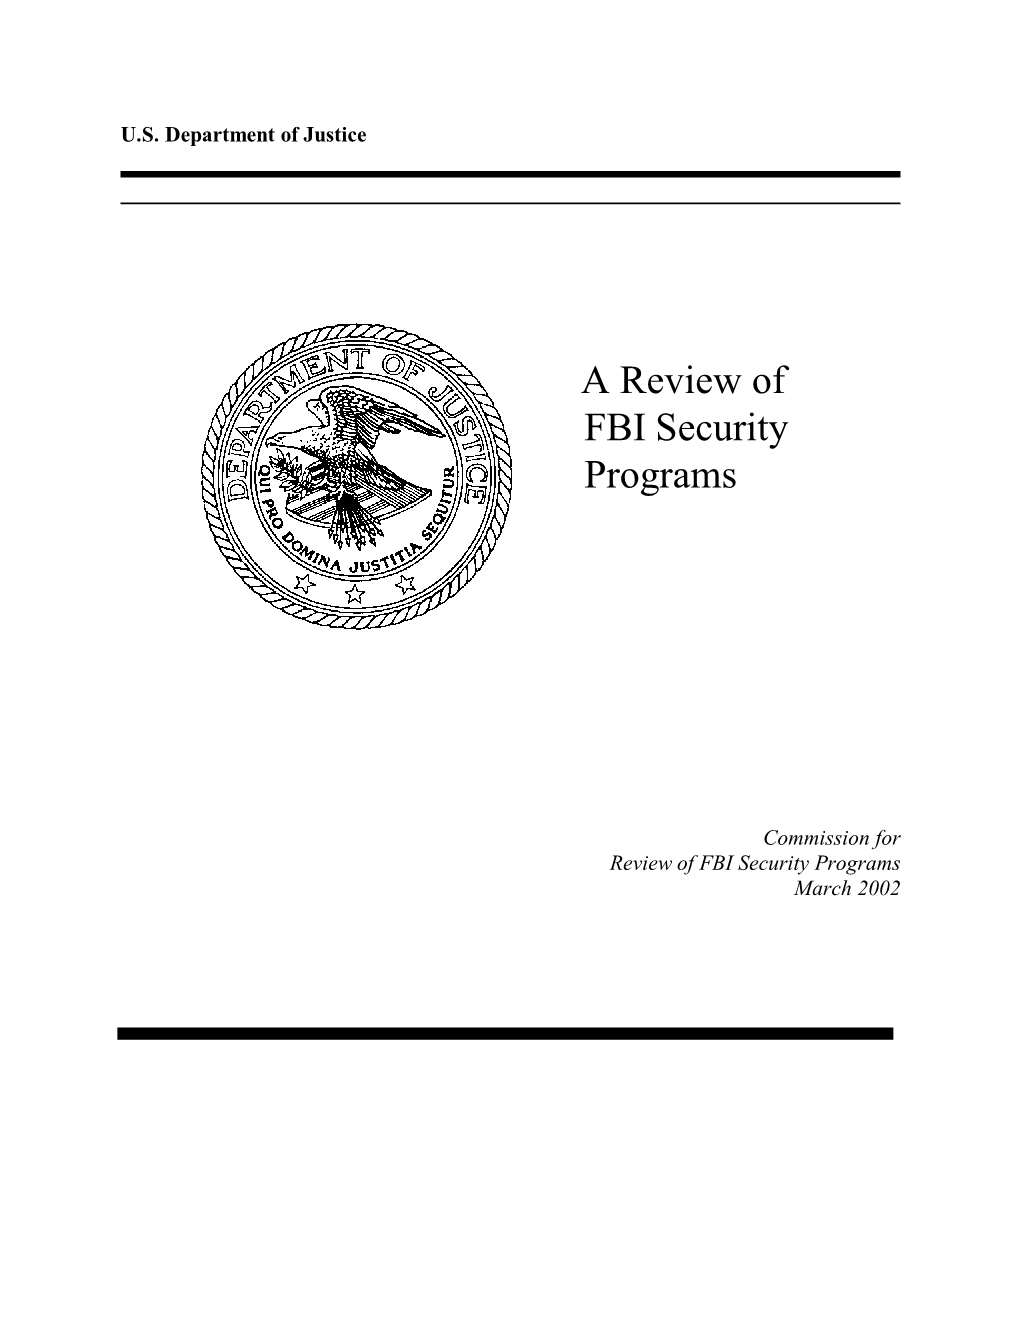 A Review of FBI Security Programs, March 2002